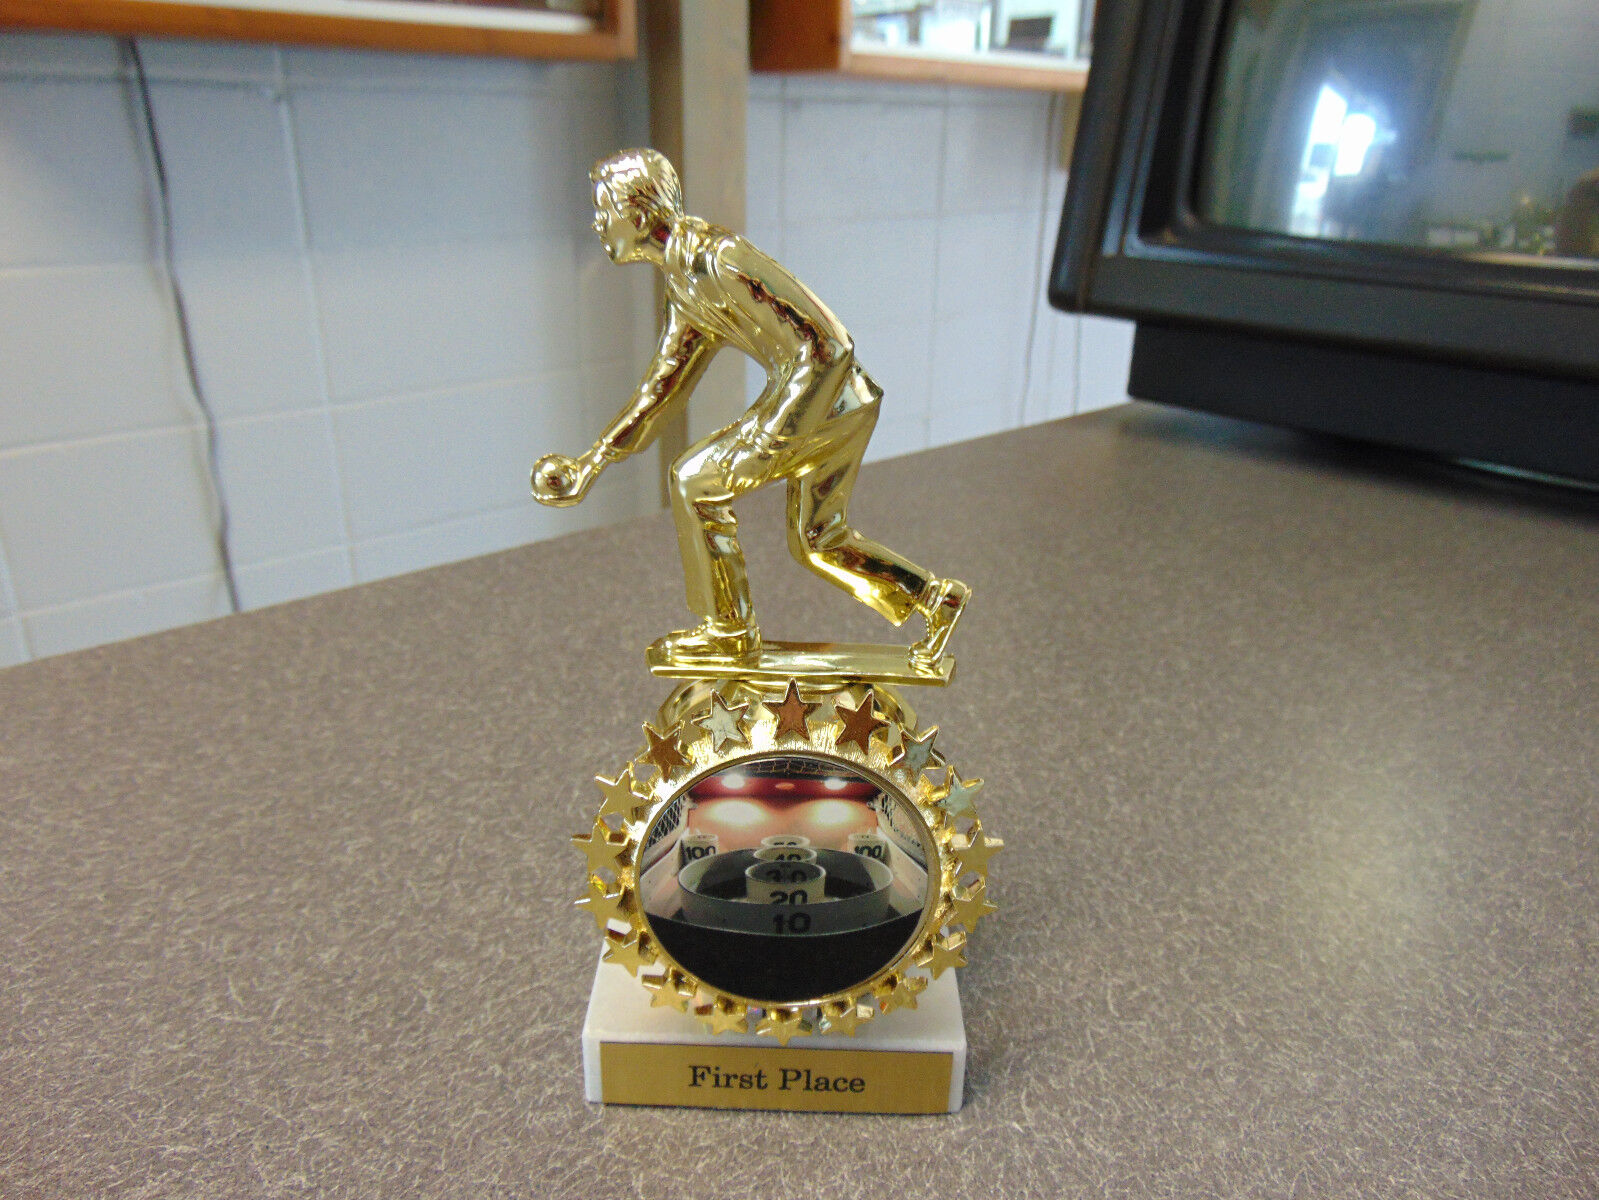 New Skee Ball First Place Trophy For Men. Style #4 For Any Skeeball Tournament